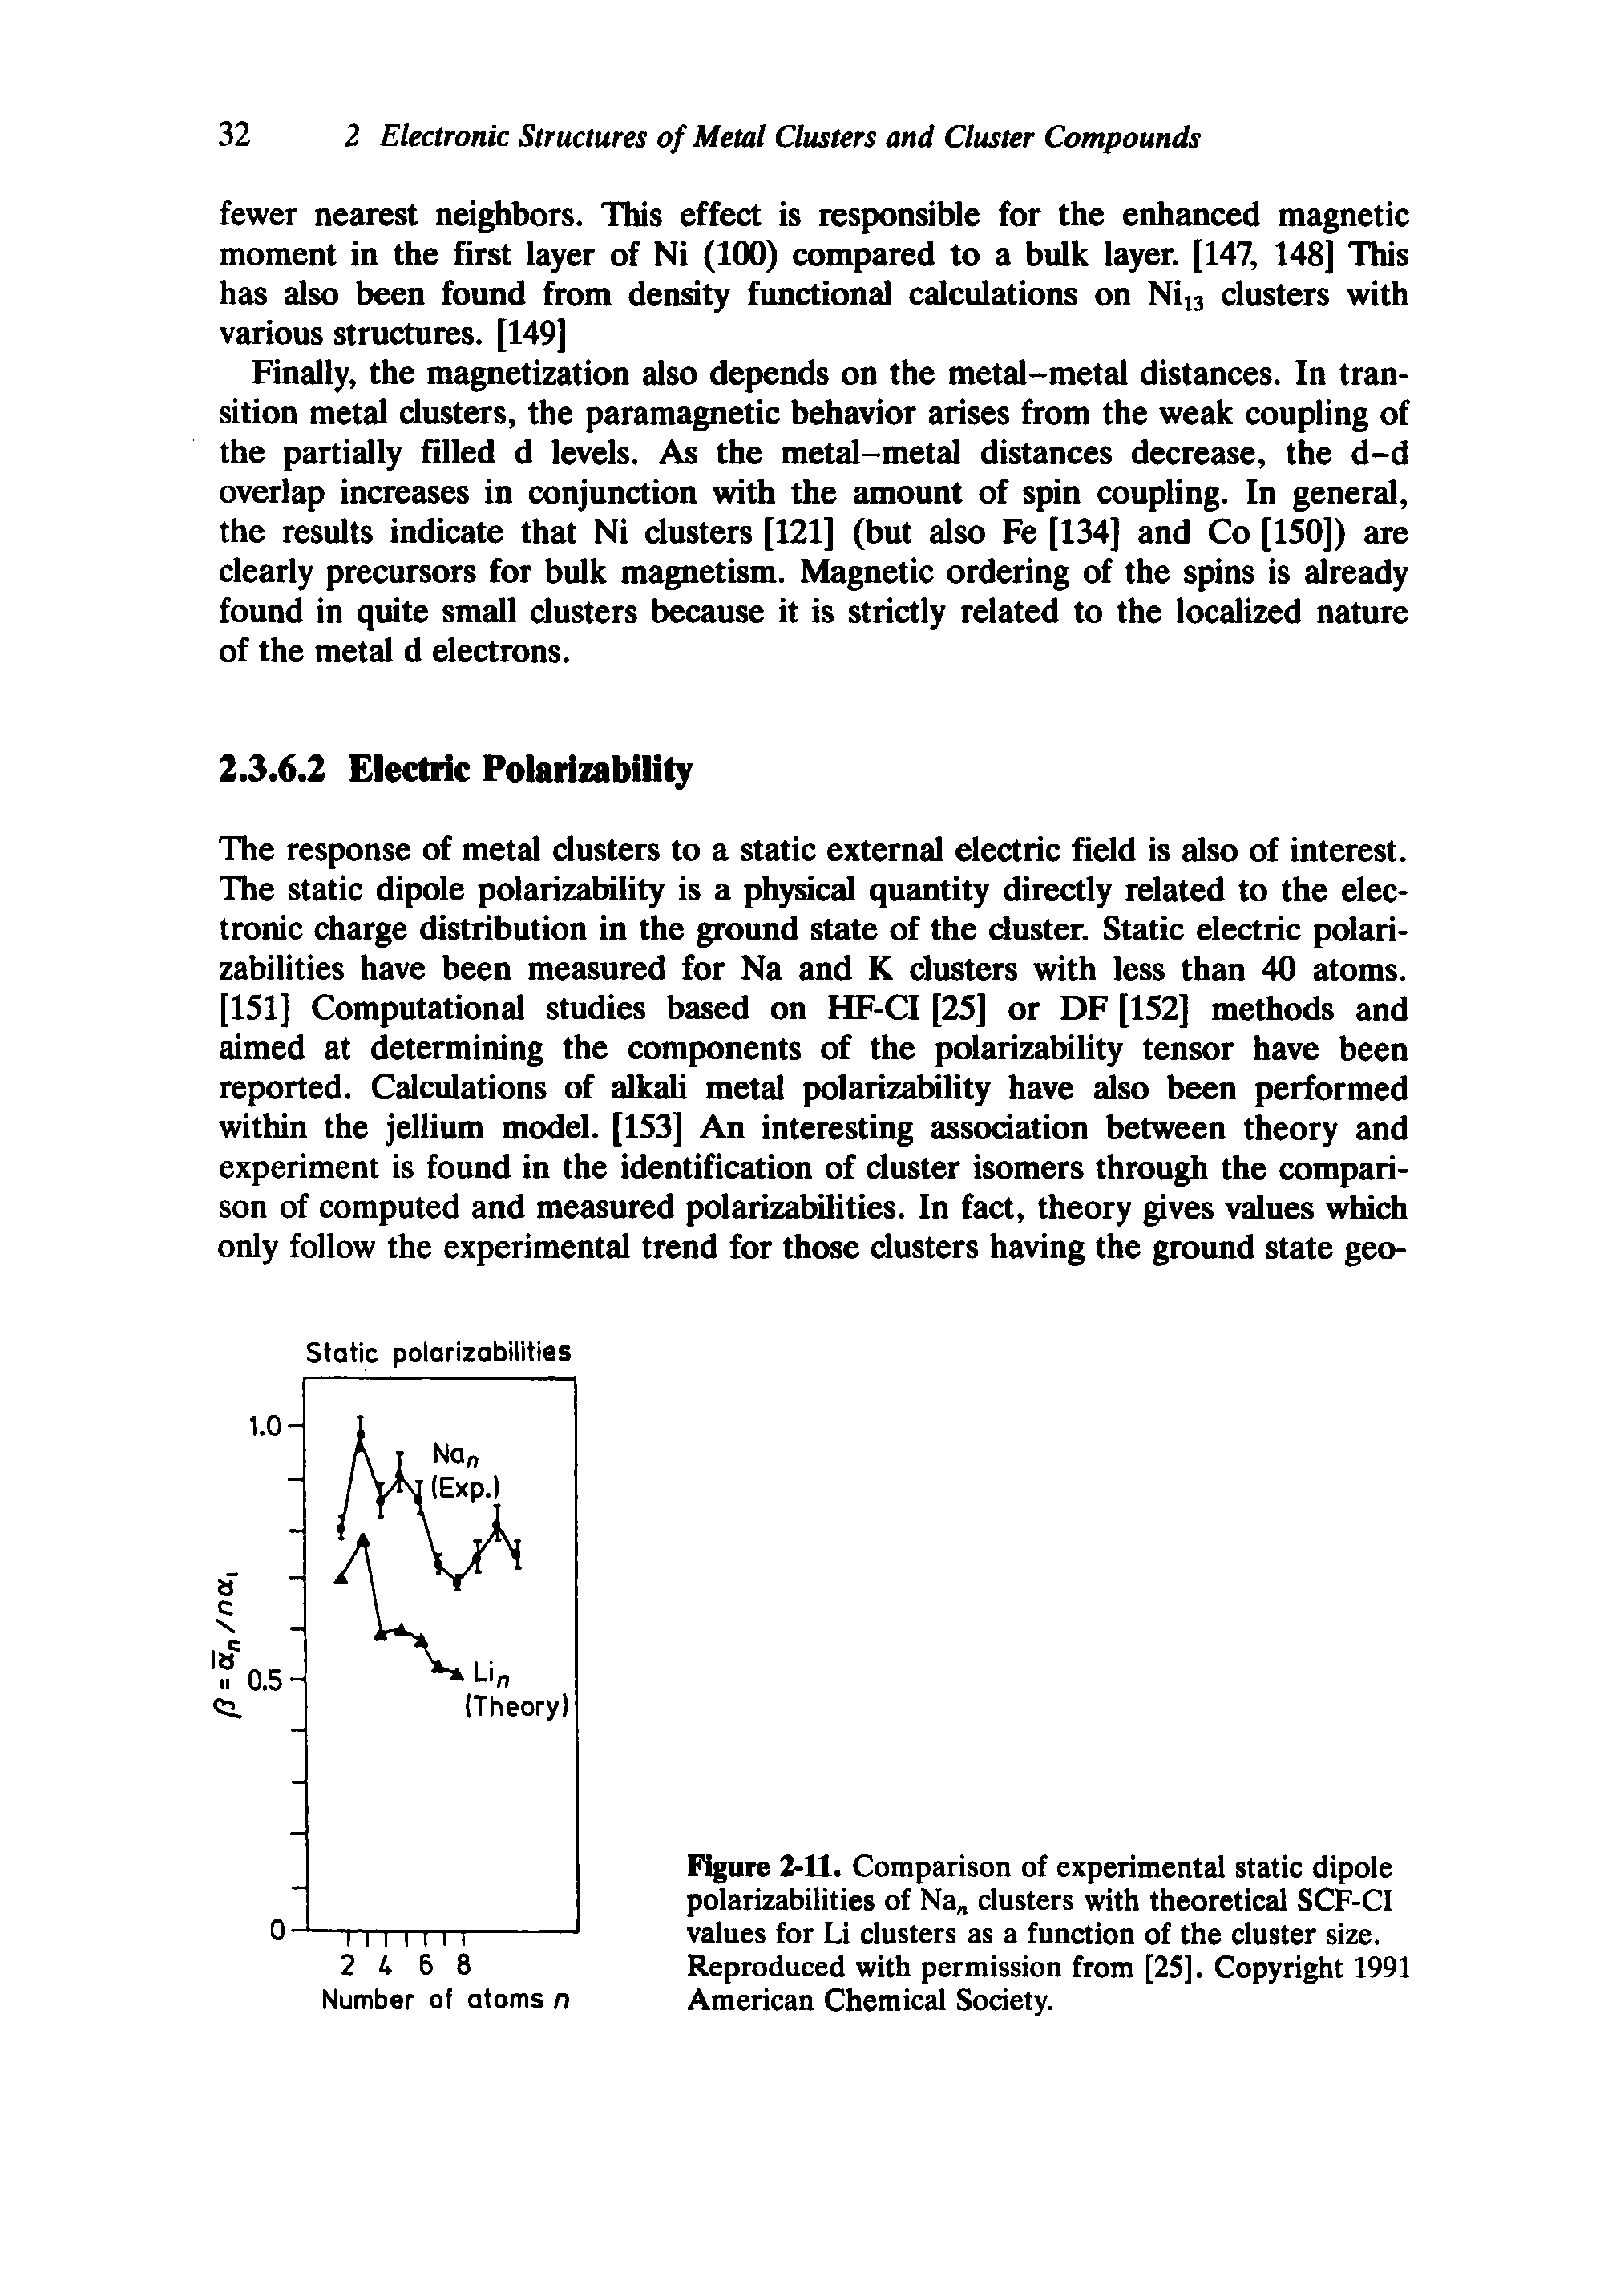 Figure 2-11. Comparison of experimental static dipole polarizabilities of Na clusters with theoretical SCF-CI values for Li clusters as a function of the cluster size. Reproduced with permission from [25]. Copyright 1991 American Chemical Society.